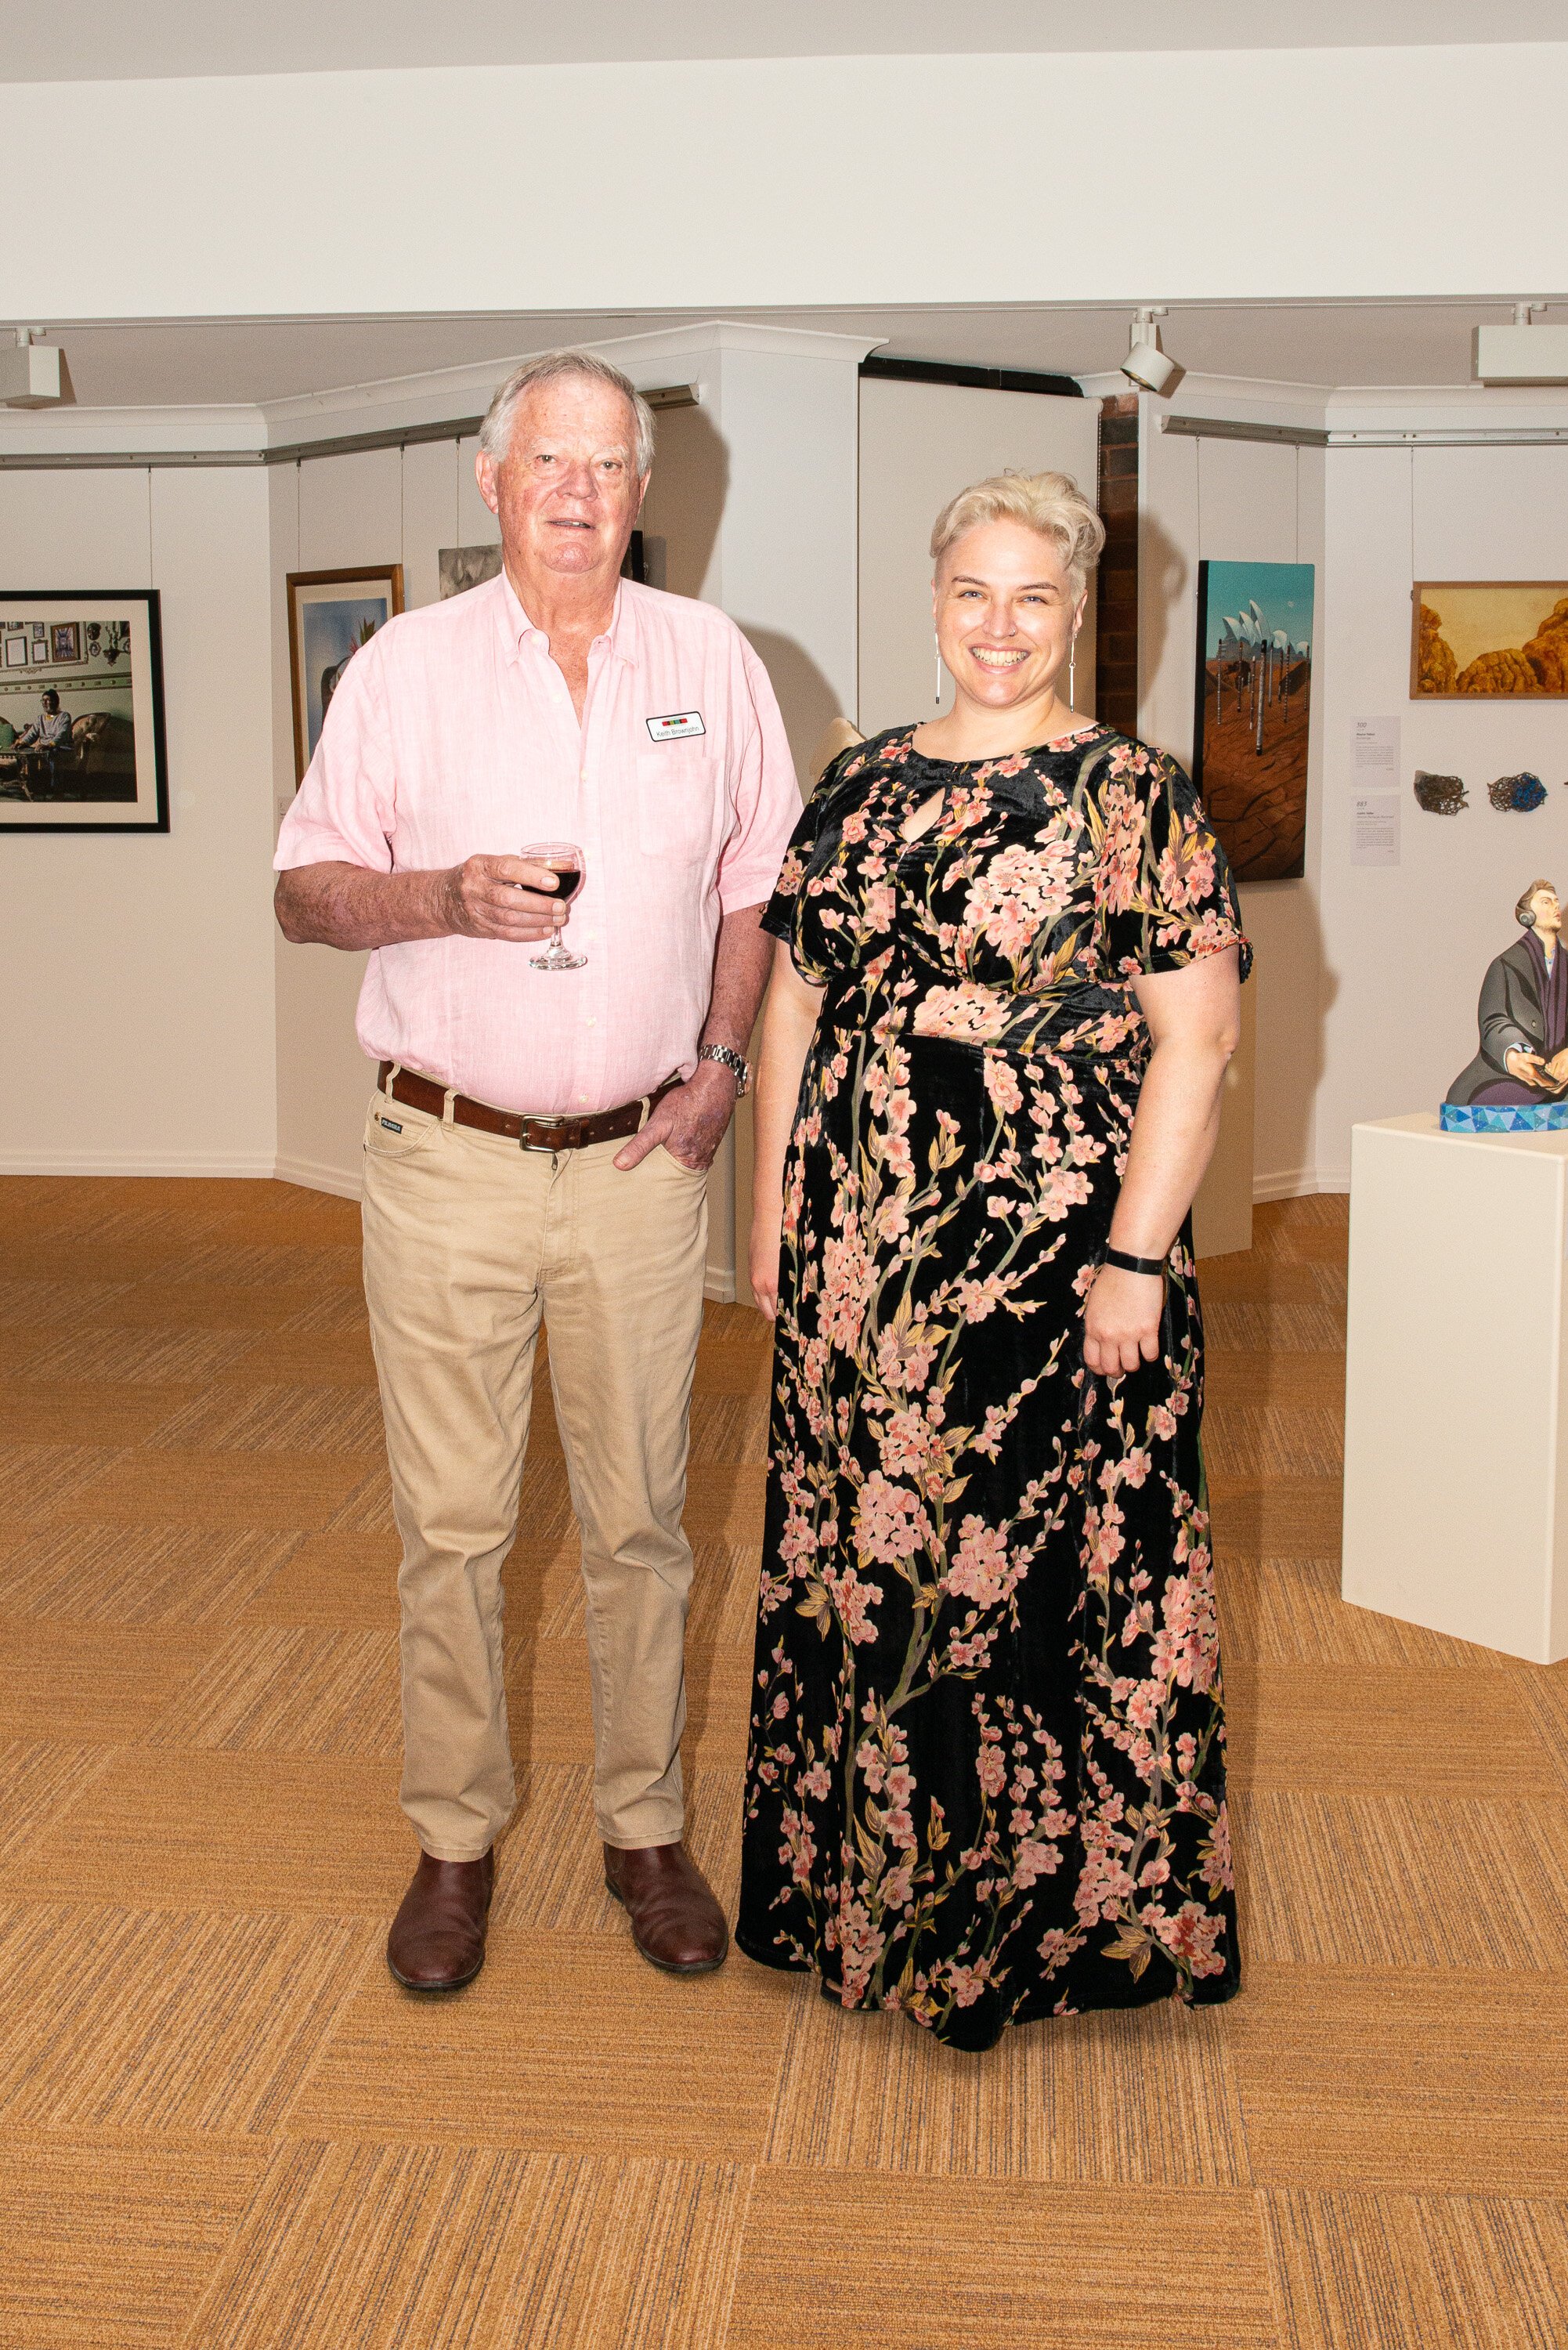 Gallery President Keith Brownjoh and Rachael Parsons NERAM- photo by Keith Barnett